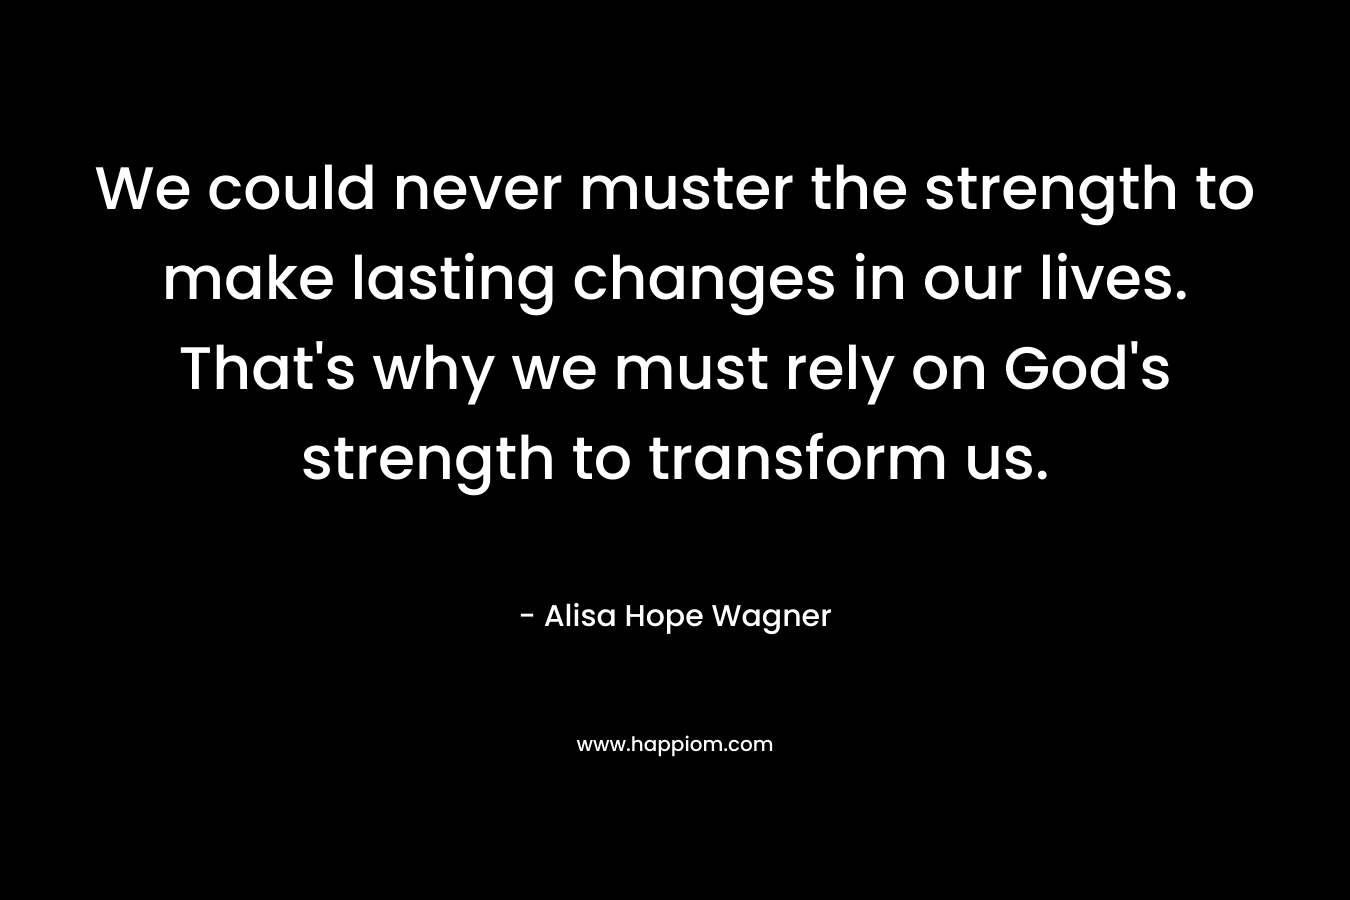 We could never muster the strength to make lasting changes in our lives. That’s why we must rely on God’s strength to transform us. – Alisa Hope Wagner